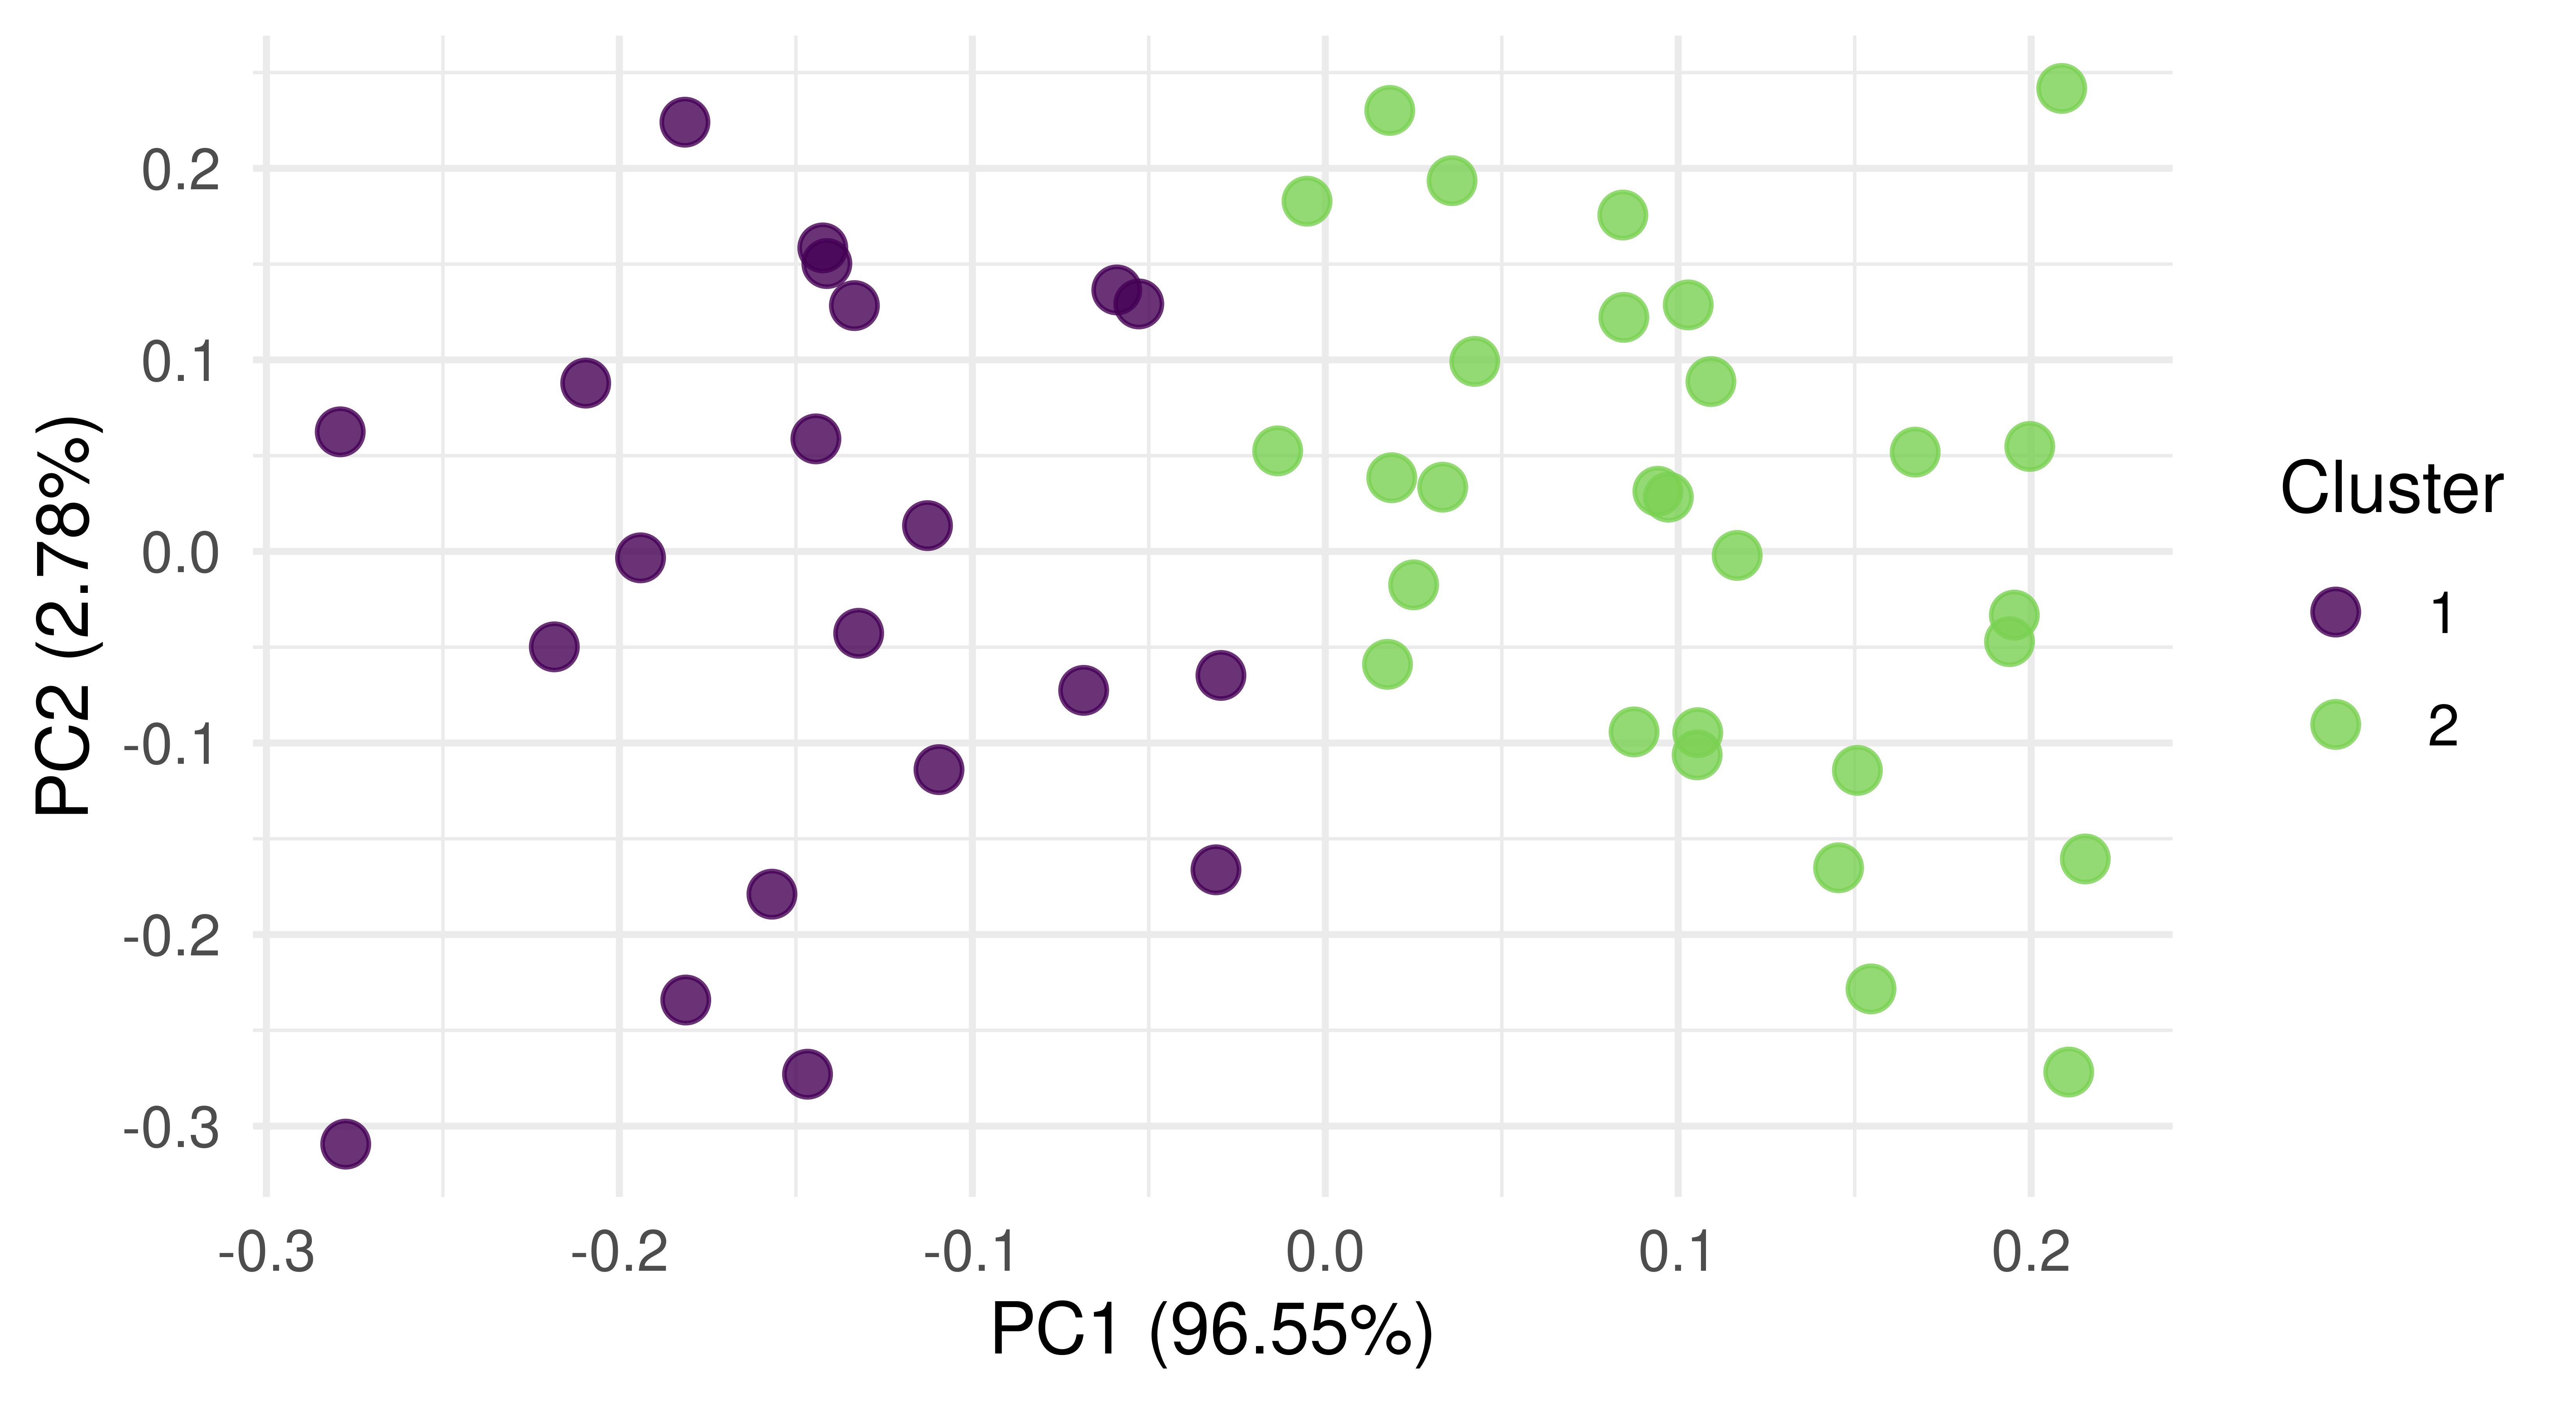 Scatter plot of green (cluster 2) and purple (cluster 1) points. x-axis: PC1 (96.55%) between -0.3 and 0.2. y-axis: PC2 (2.78%) between -0.3 and 0.2. Points are cleanly separated into two clusters by color.